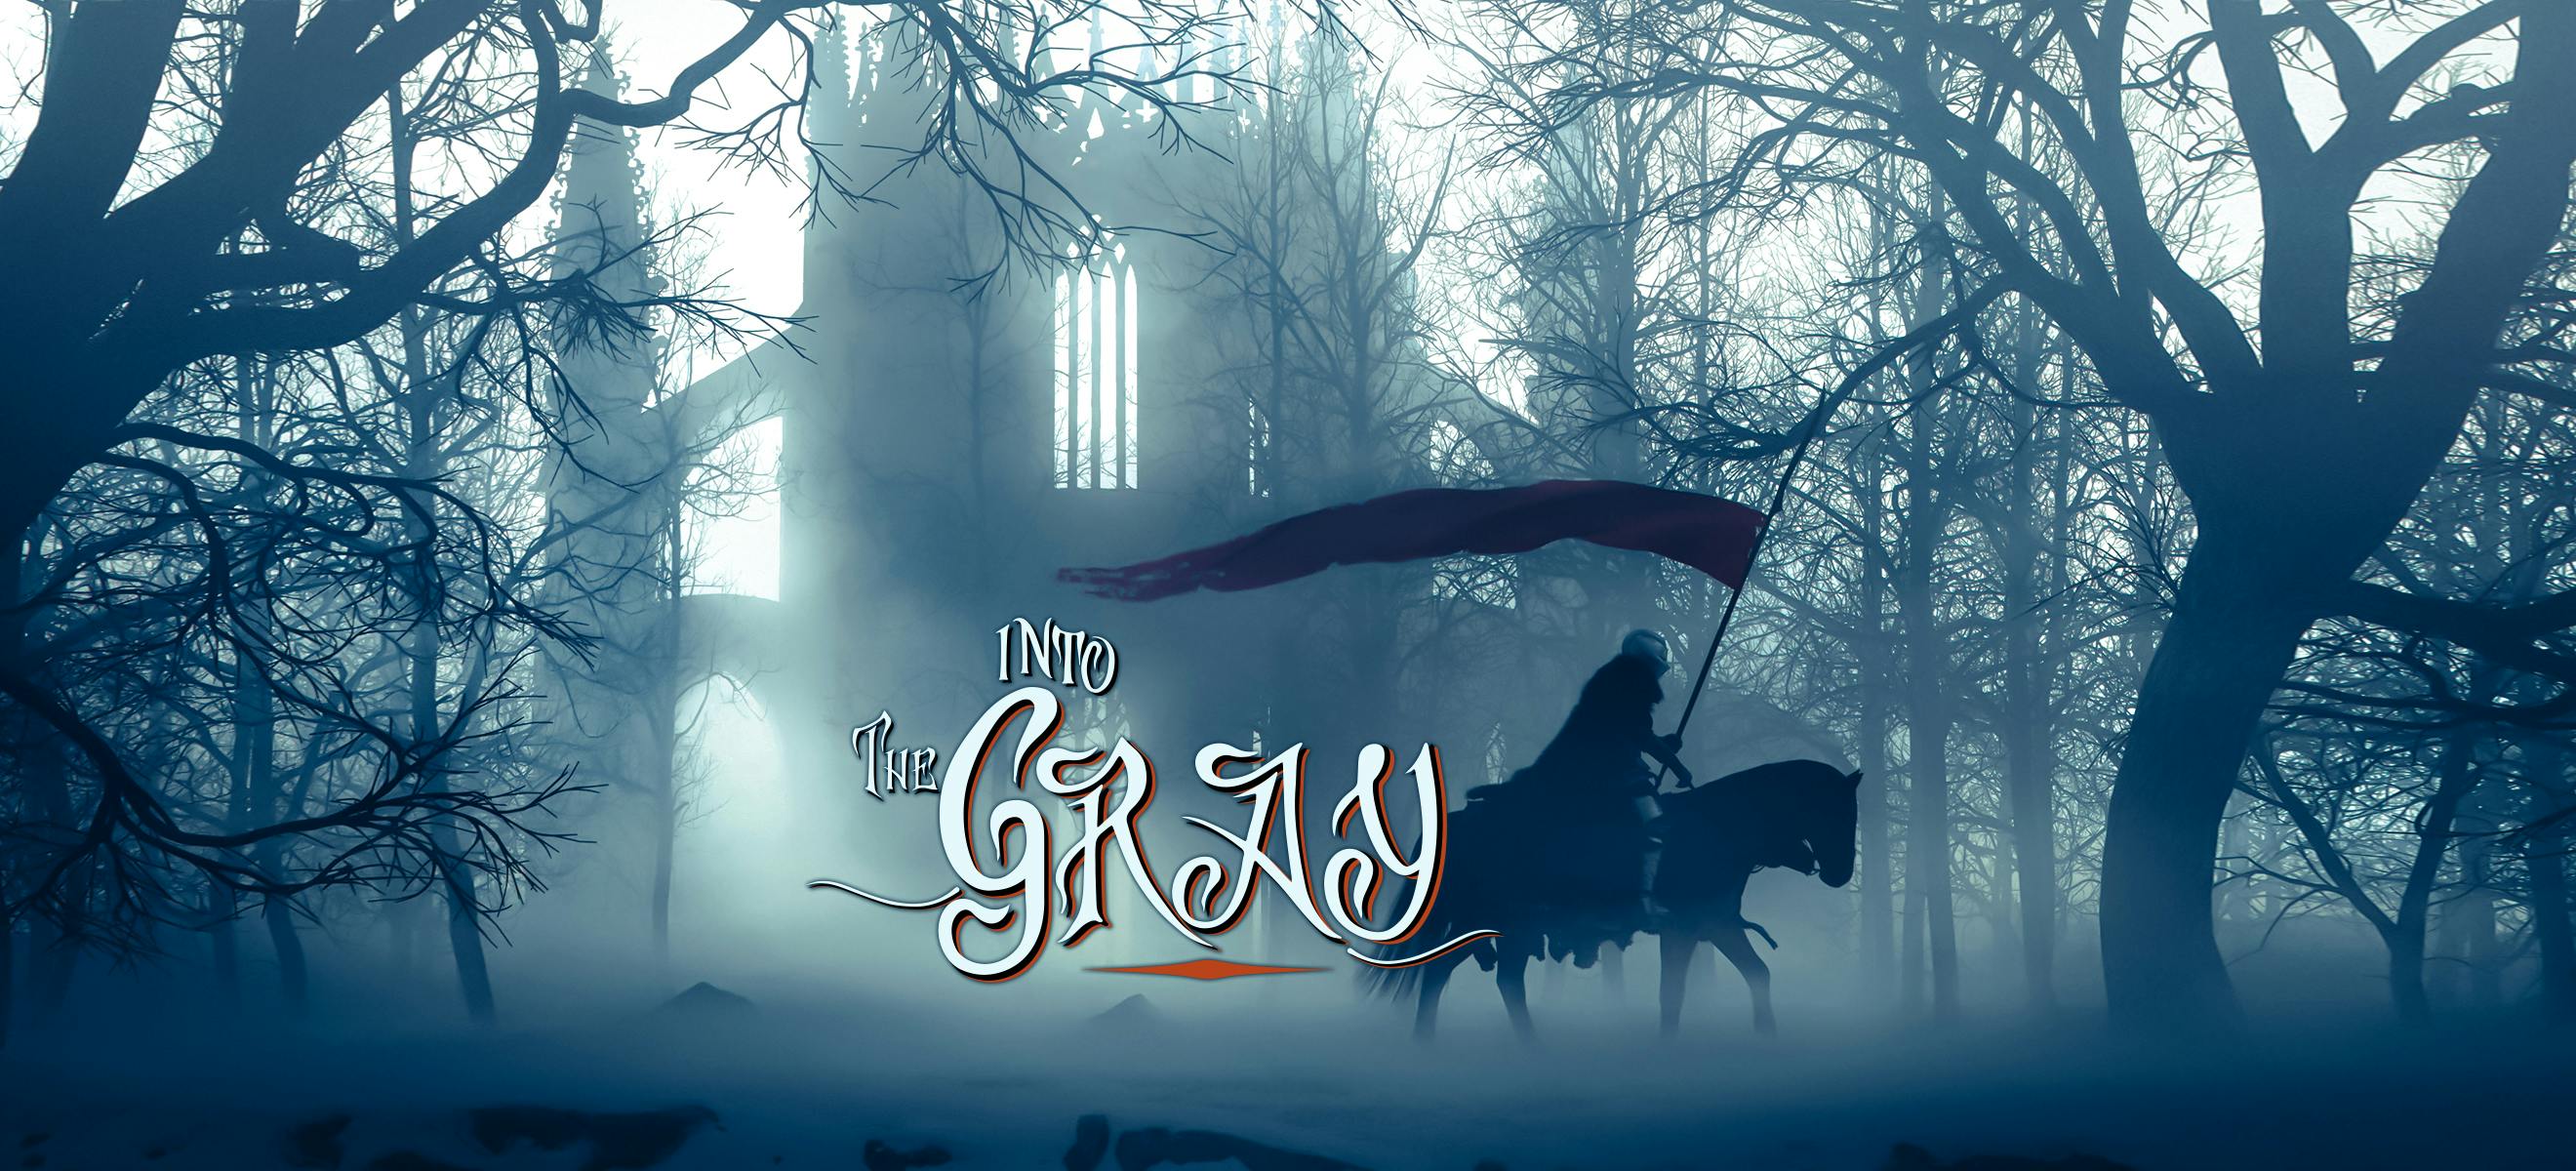 A knight riding a horse through a foggy forest, with the Into the Gray logo on the bottom of the image. 